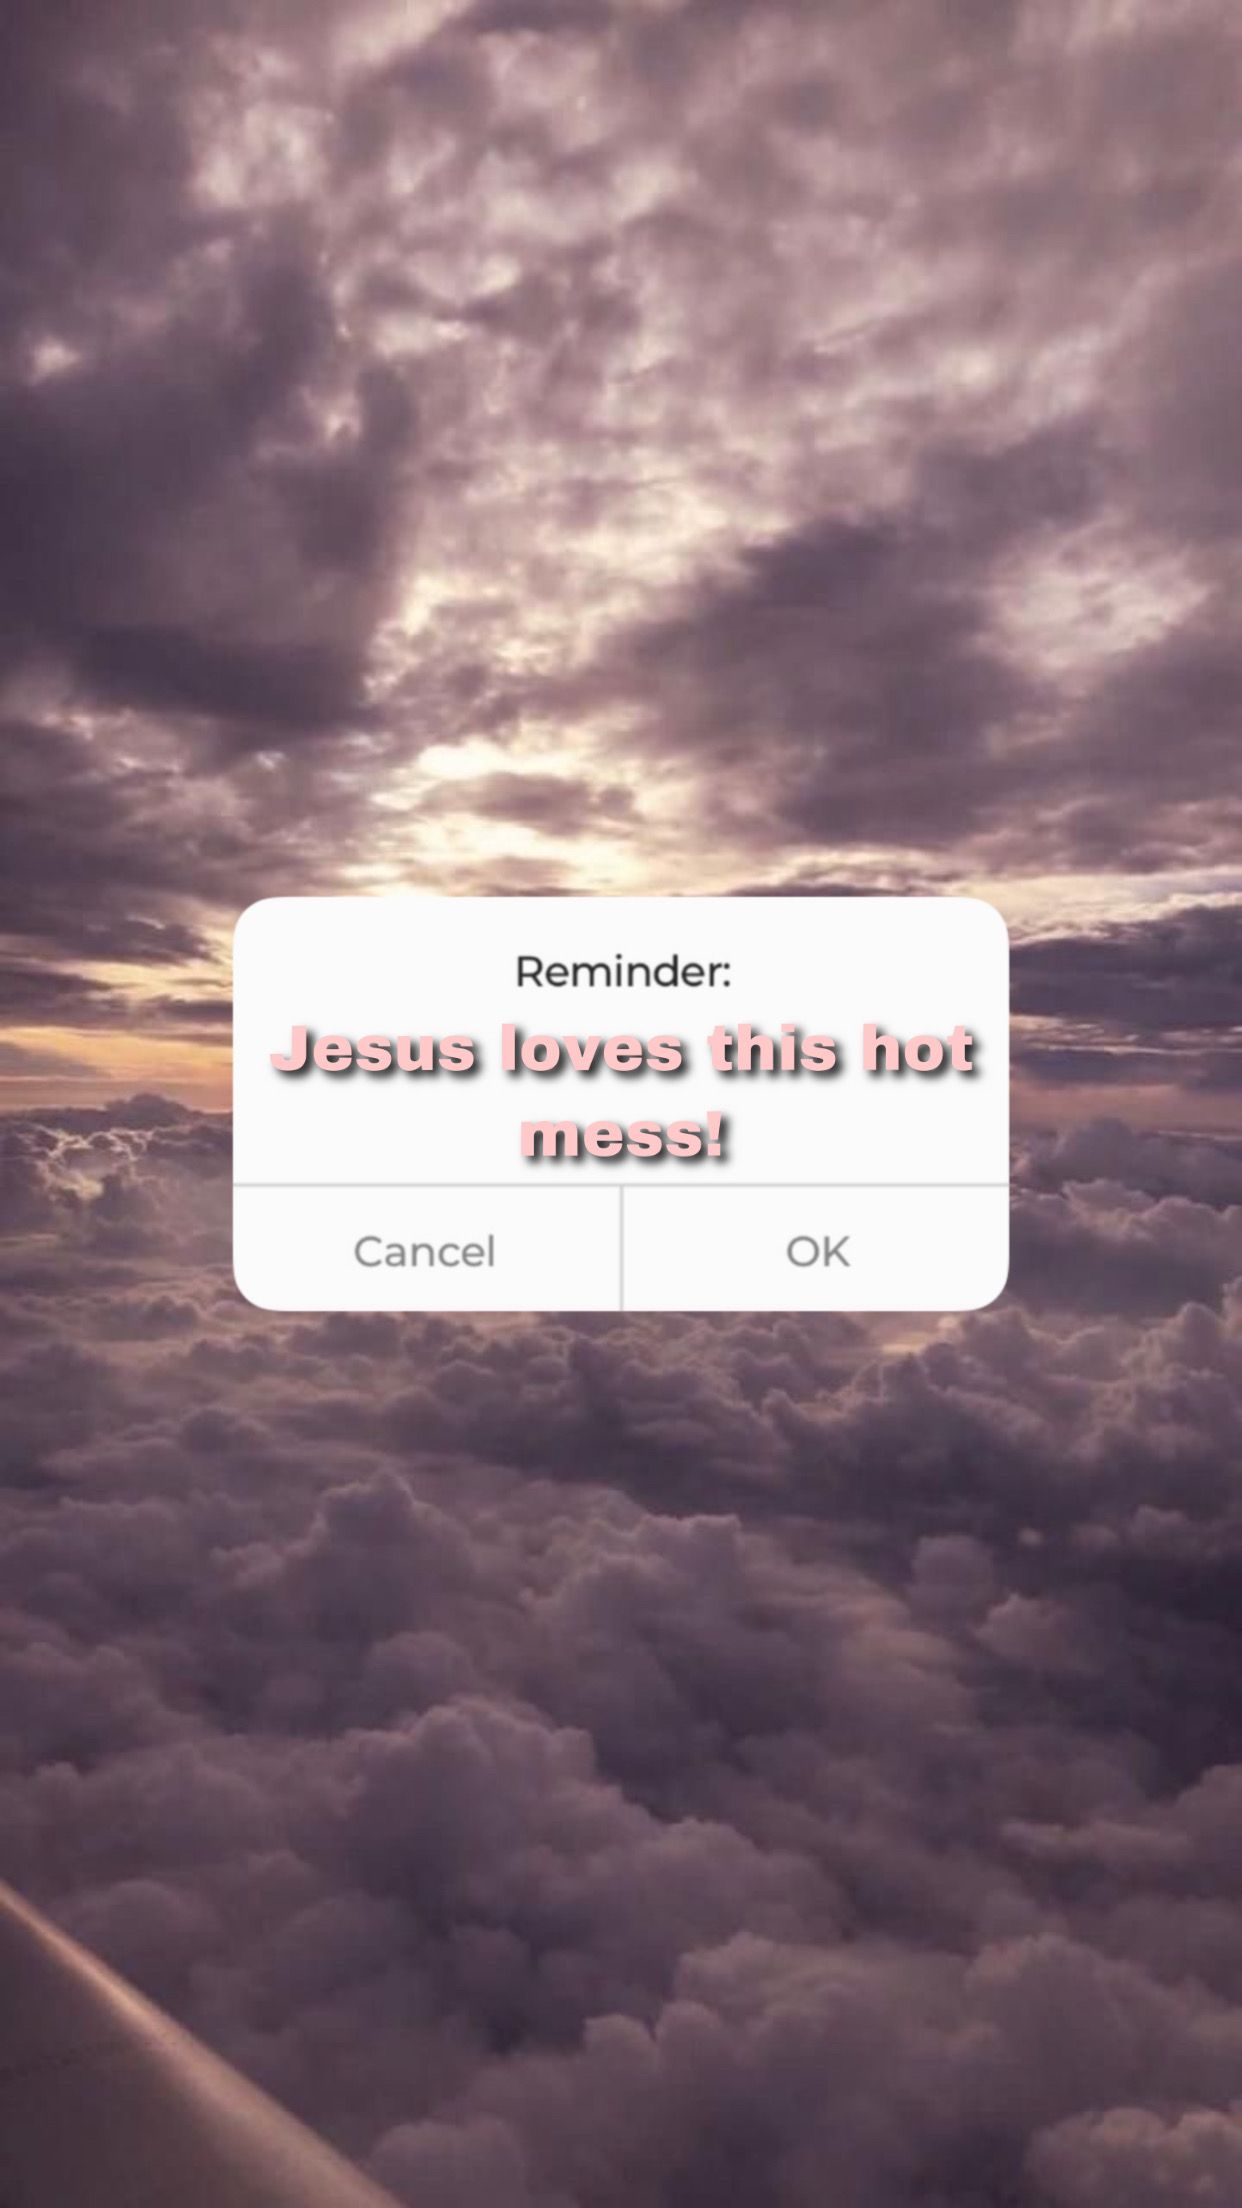 A screenshot of the screen showing jesus loving this hot mess - Jesus